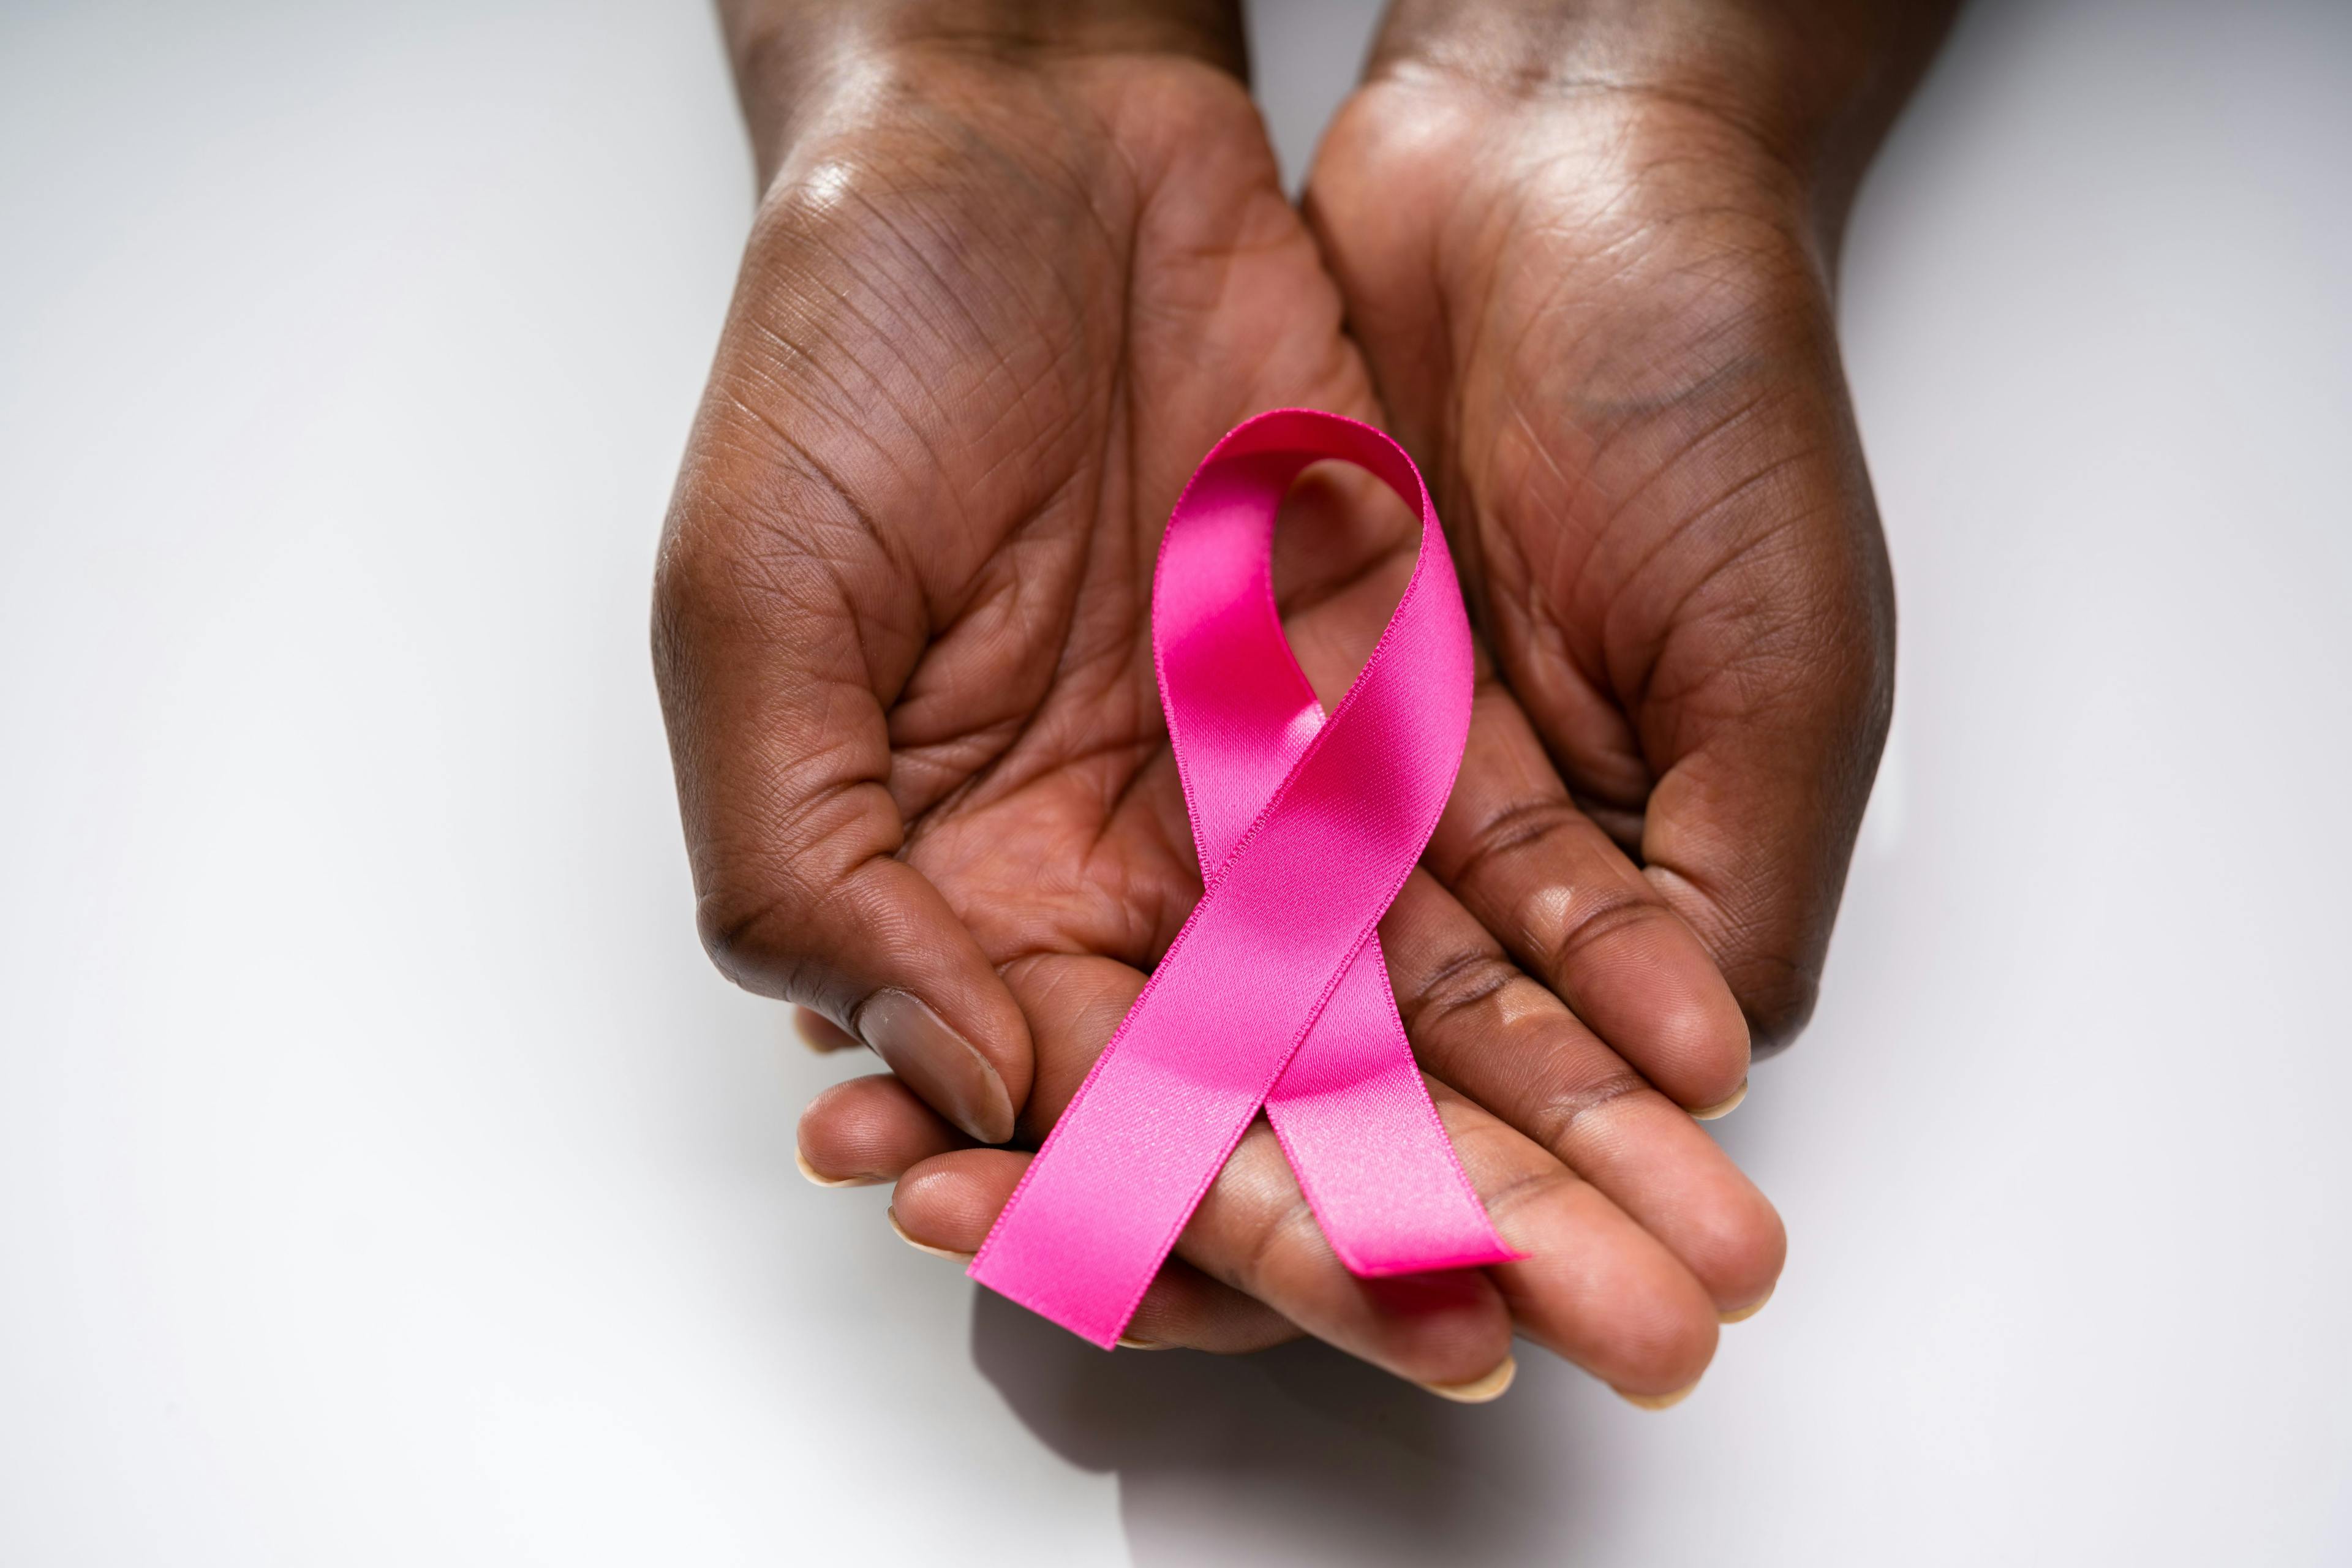 Pink Ribbon To Support Breast Cancer Cause | Image credit: © Andrey Popov - stock.adobe.com